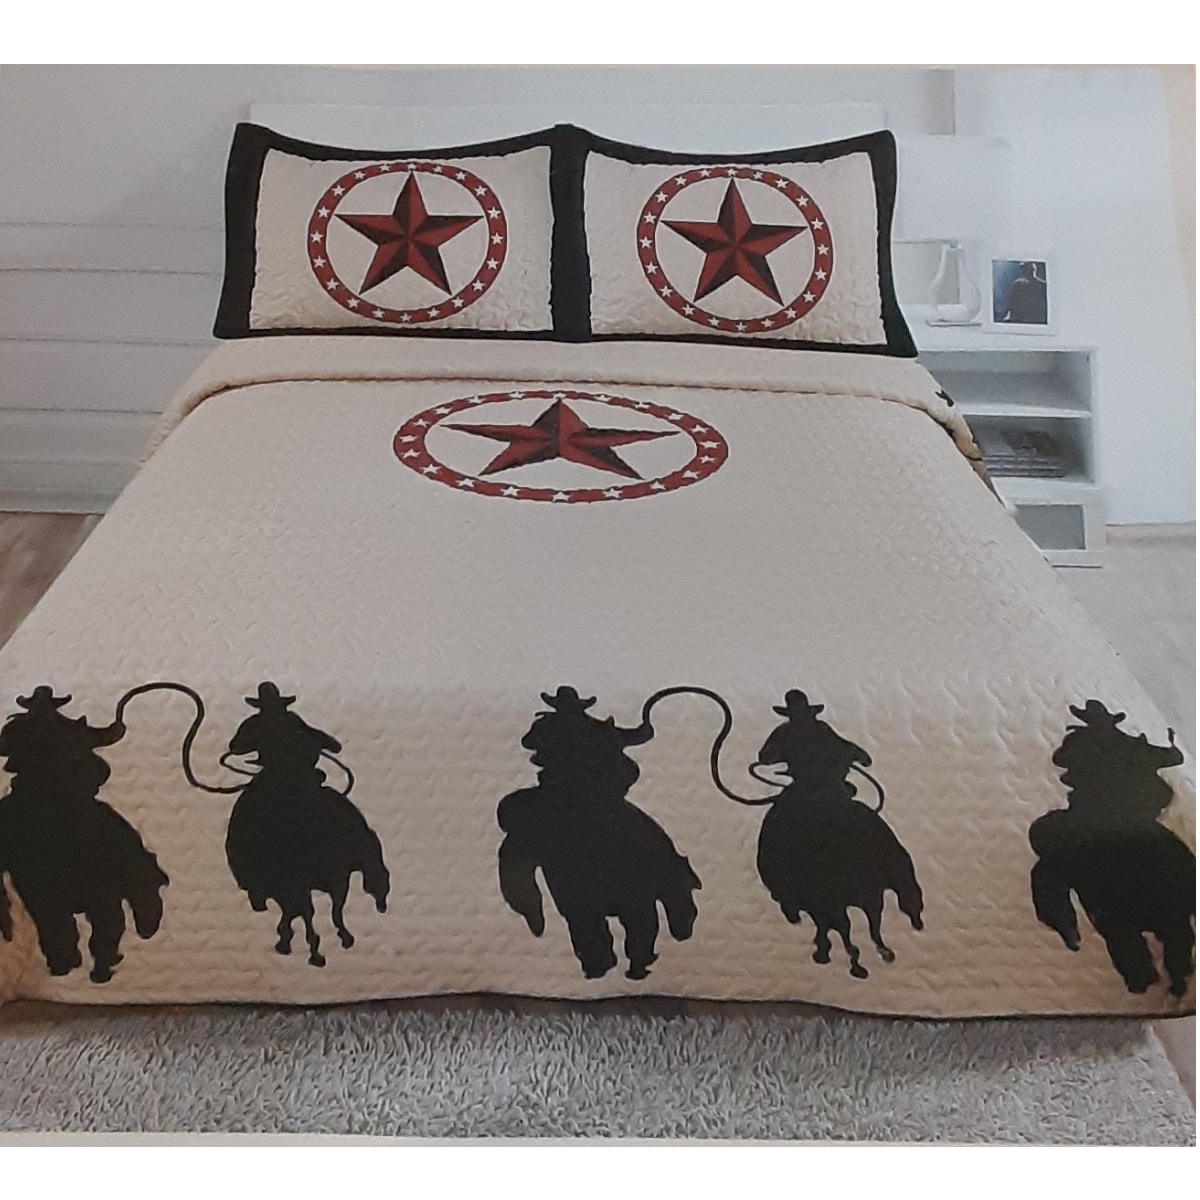 Western Design 3 Piece Quilted Bedspread Set Stars and Cowboys on horseback